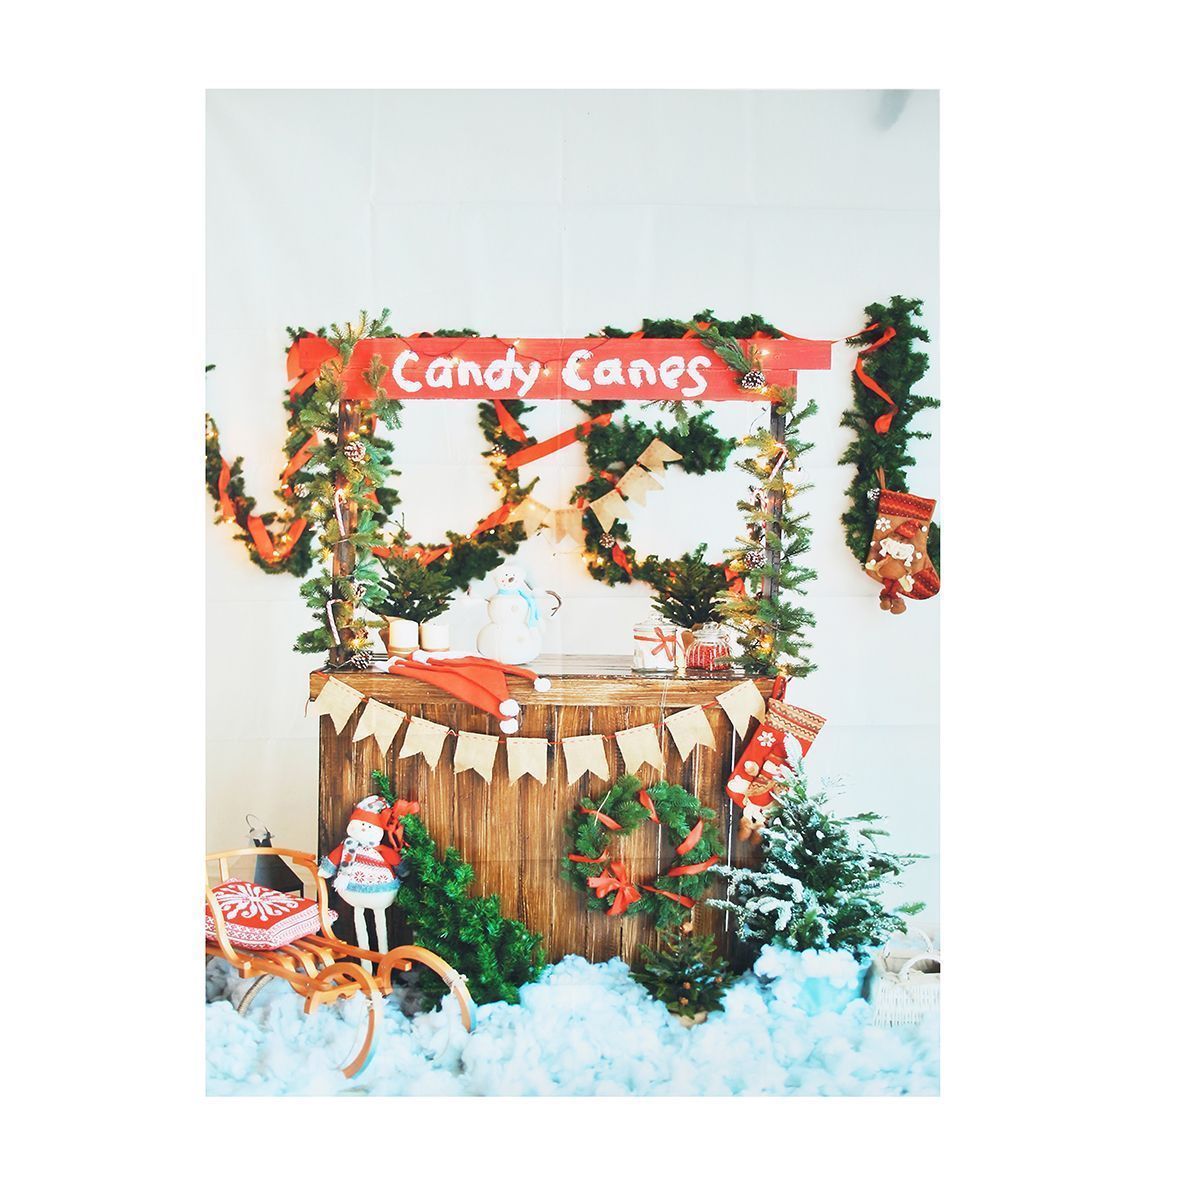 5x7FT-Christmas-Candy-Canes-Photography-Backdrop-Background-Studio-Prop-1208715